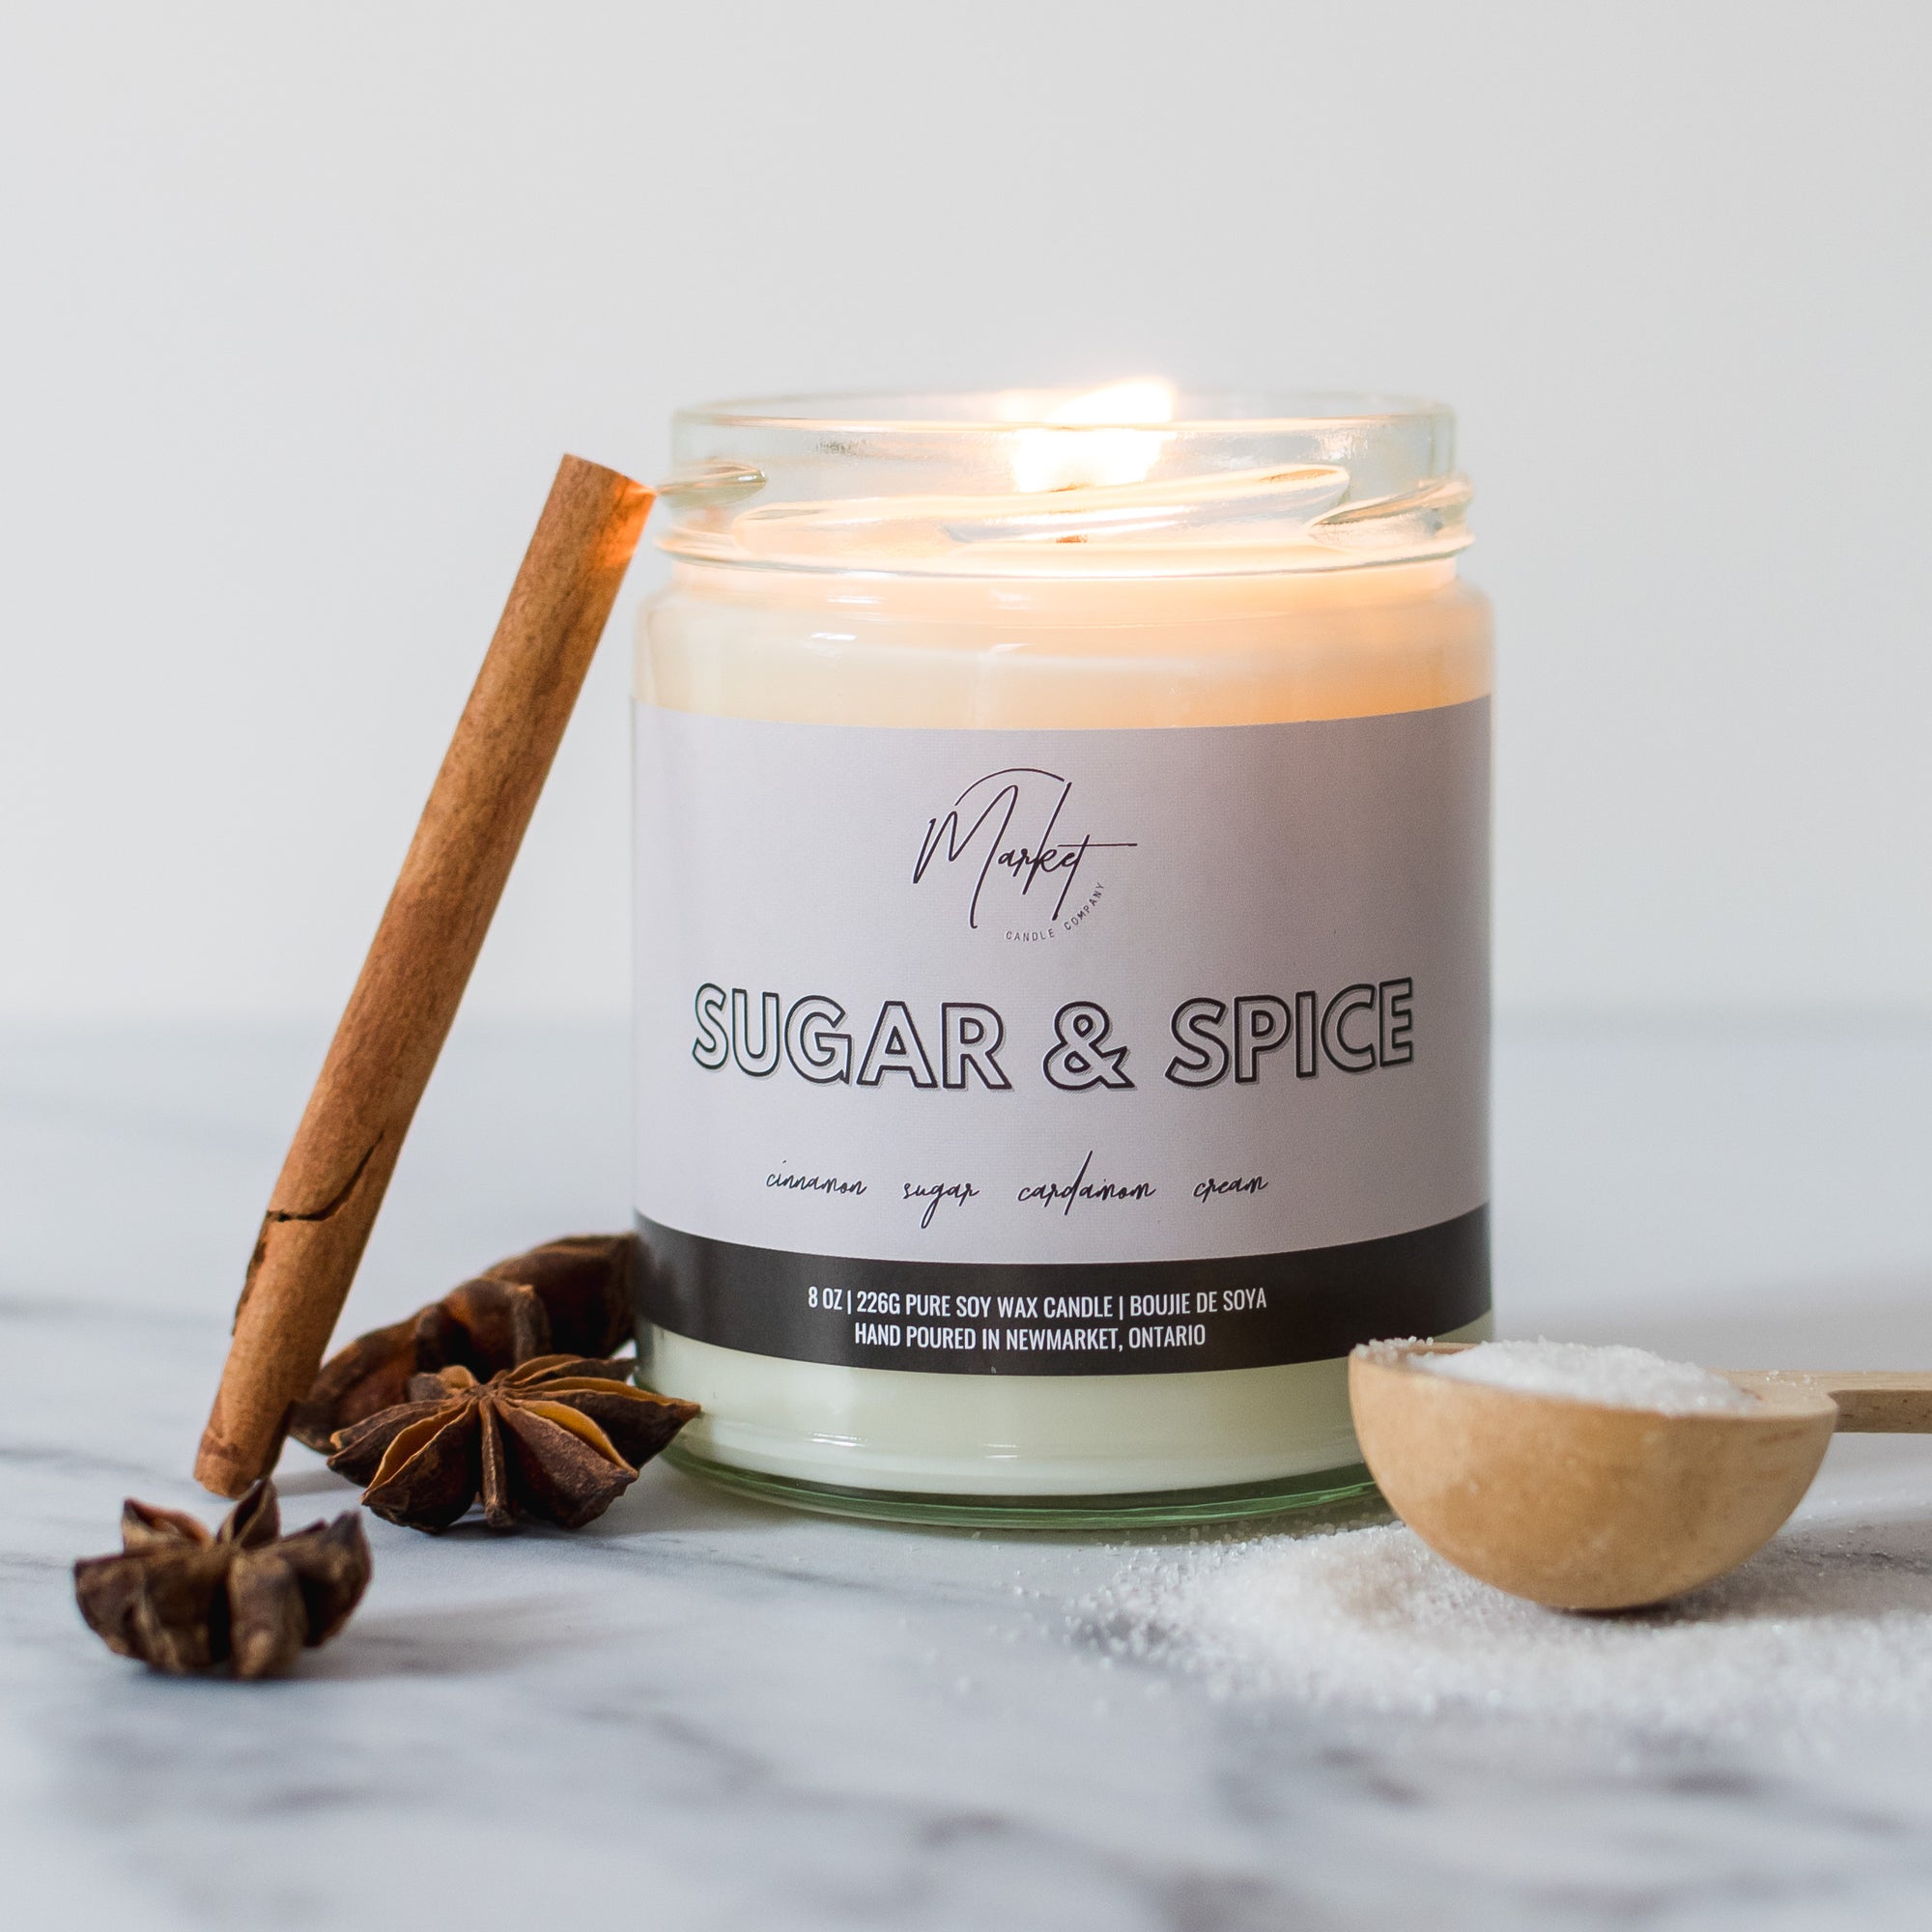 It's everything nice! Spice, smooth and some sweetness to follow. The perfect scent for a quiet evening in.